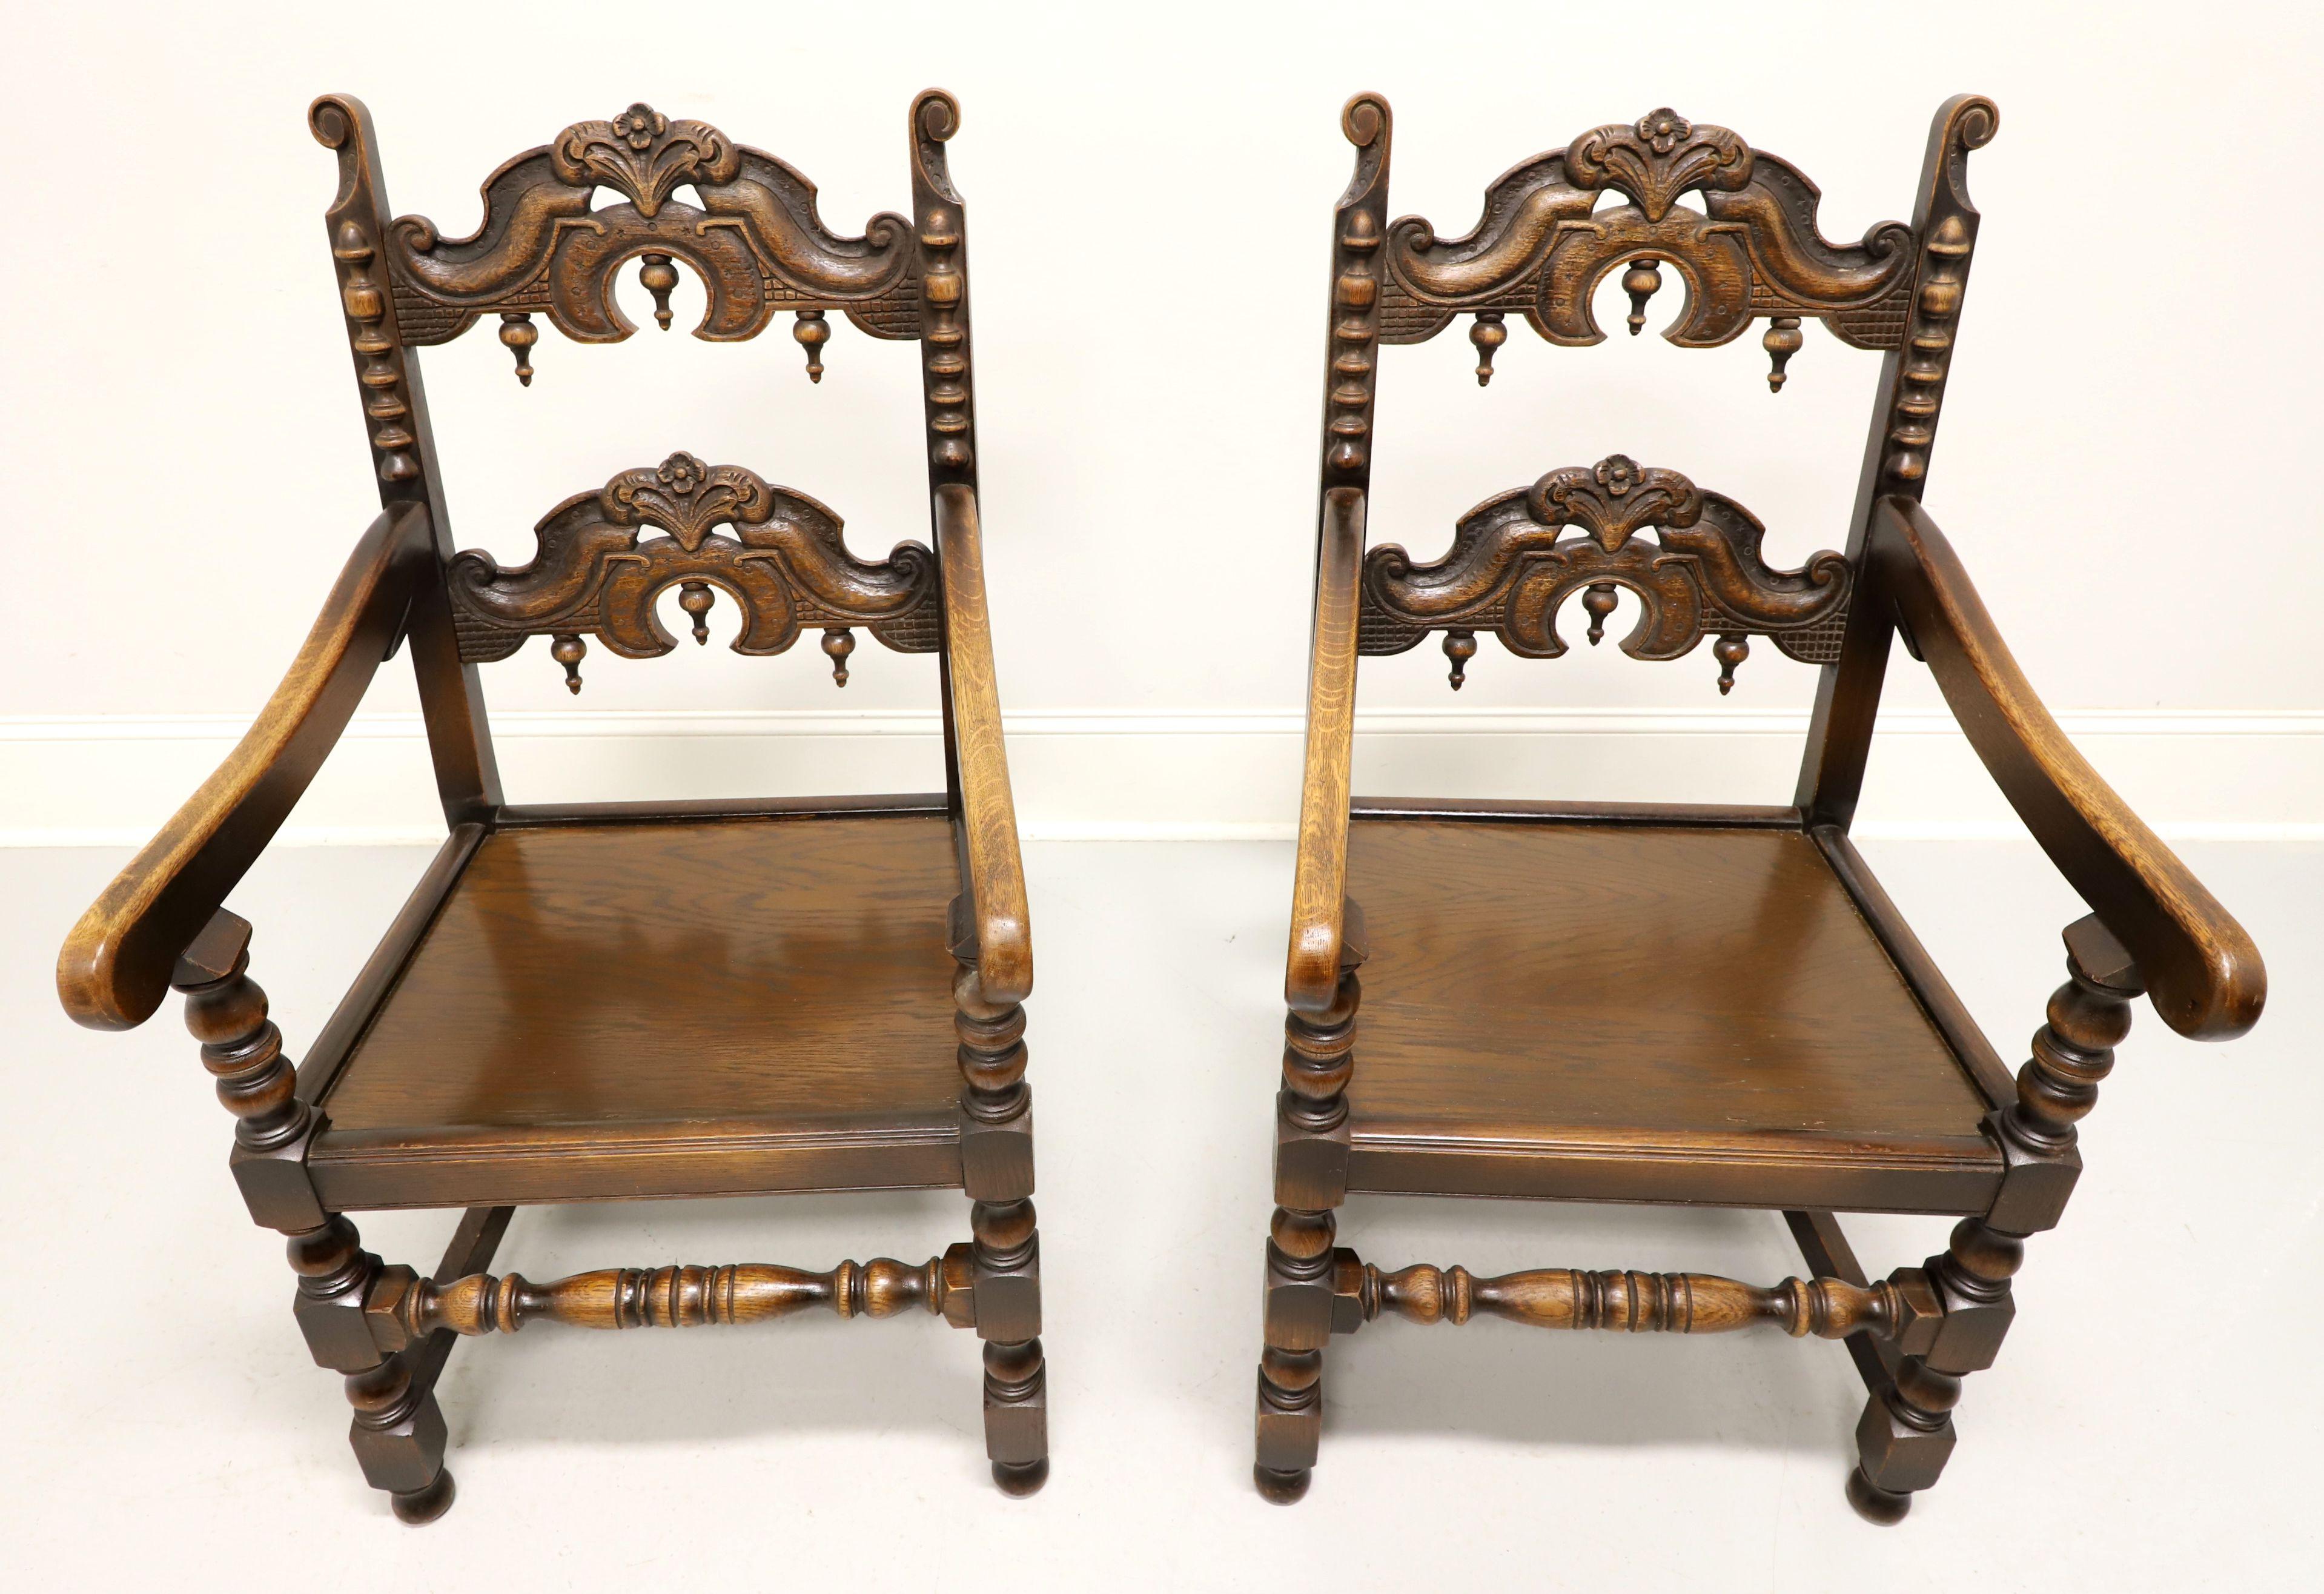 An antique pair of Gothic Revival style dining armchairs by Grand Rapids Bookcase and Chair Company. Solid oak with carved and turned details. Features a decoratively carved ladder back with inverted finials, carved stiles, sloped curved arms with